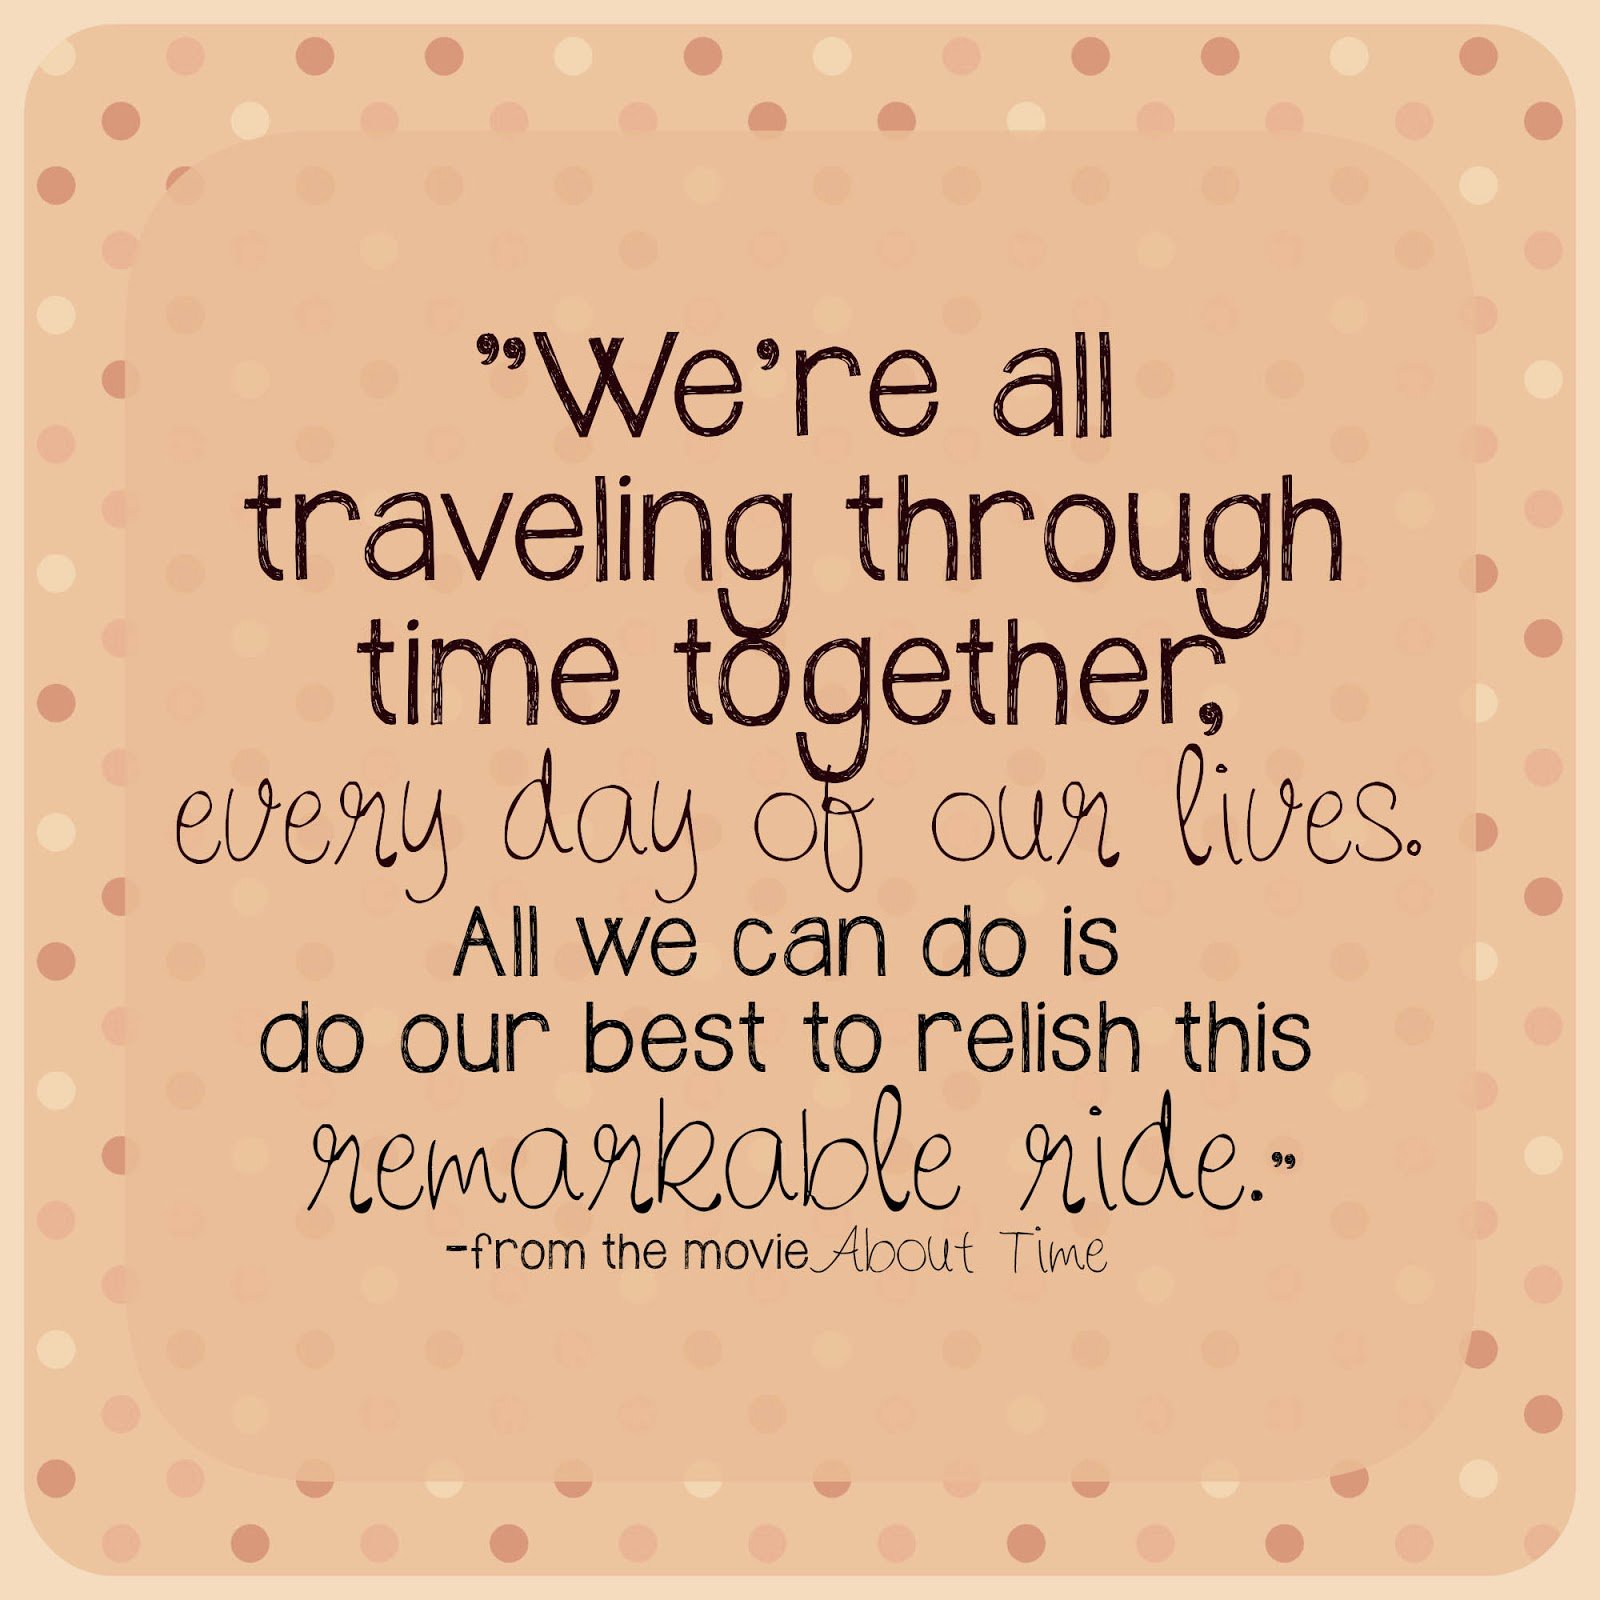 Sharing Life Together Quotes. QuotesGram